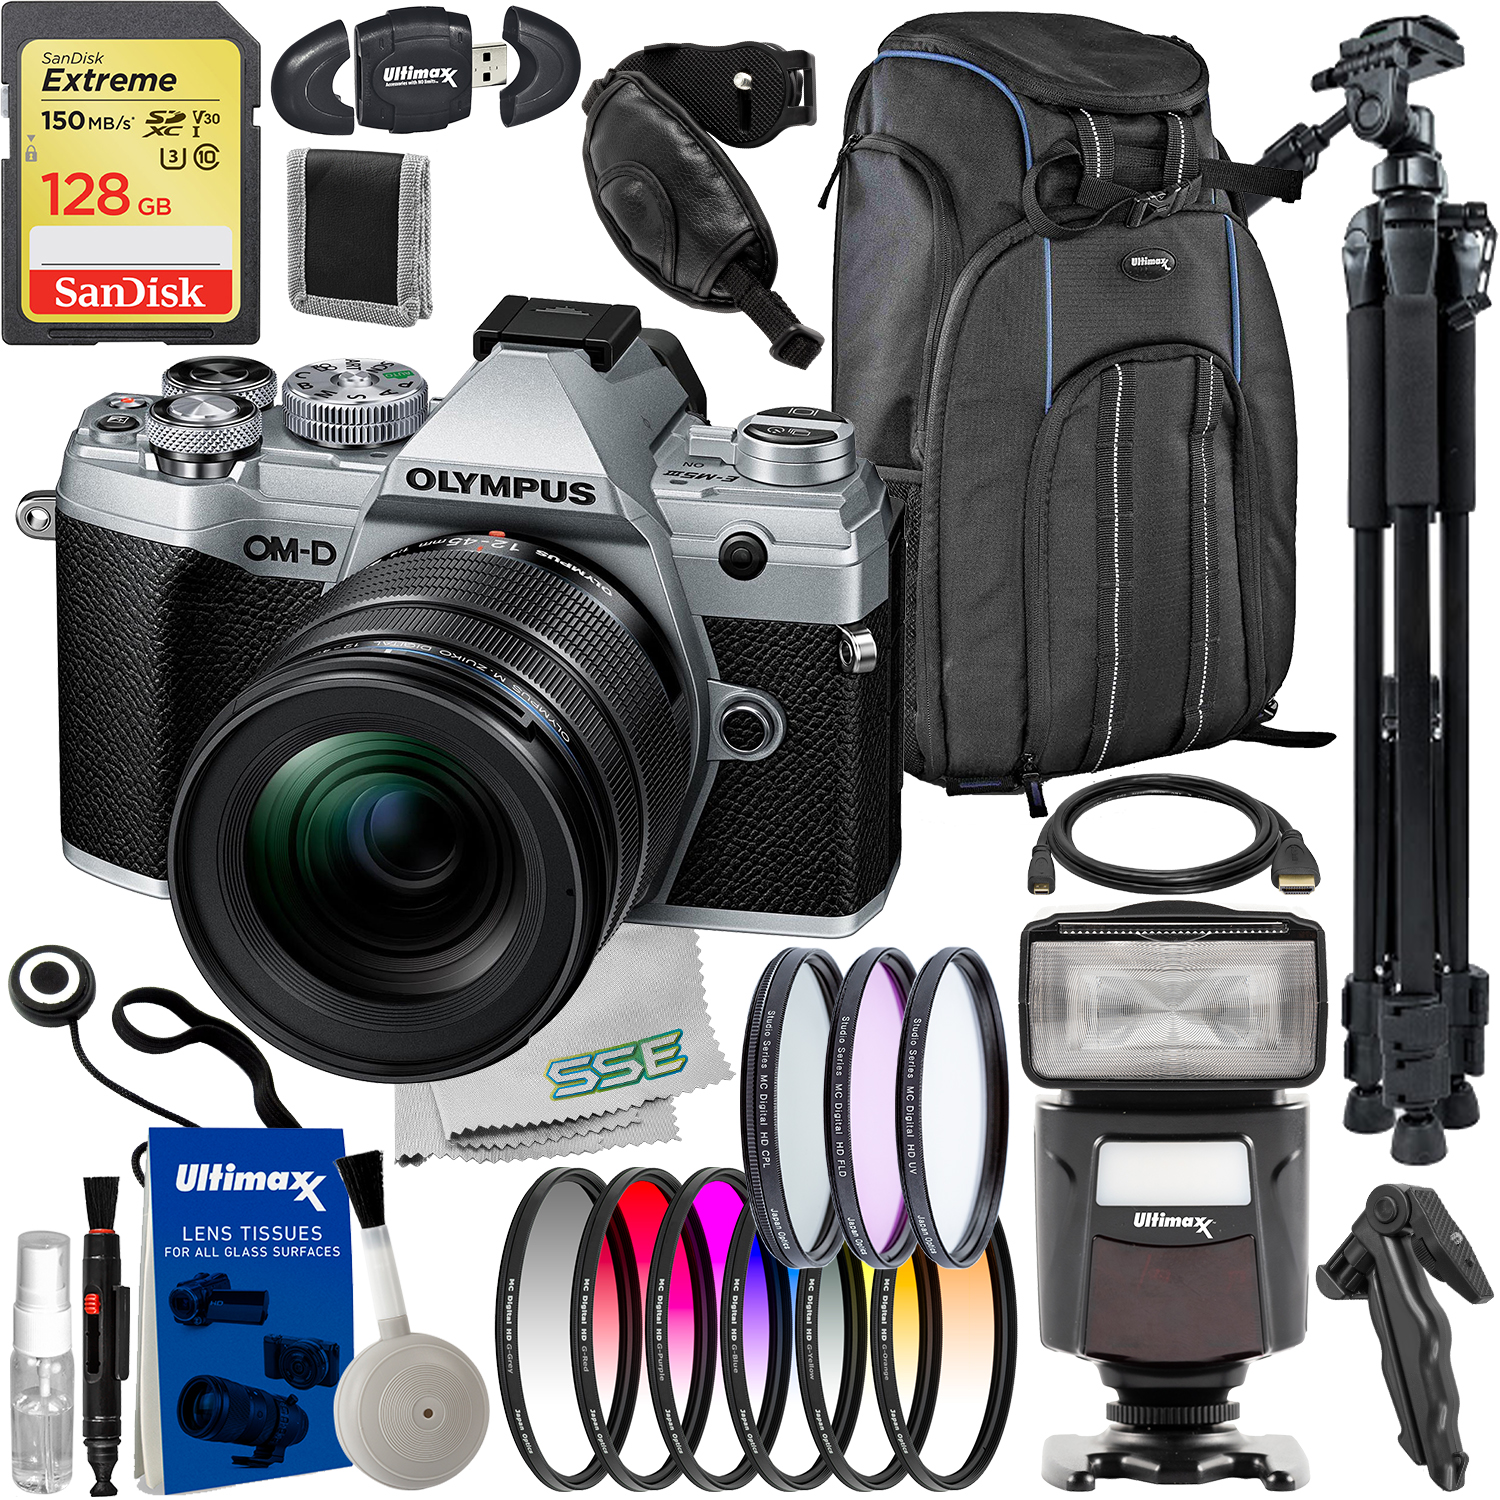 Olympus OM-D E-M5 Mark III Mirrorless Camera with 12-45mm Lens (Silver) + SanDisk 128GB Extreme SDXC, Universal Speedlite with LED Video Light, Deluxe Camera Backpack & So Much More (31pc Bundle)